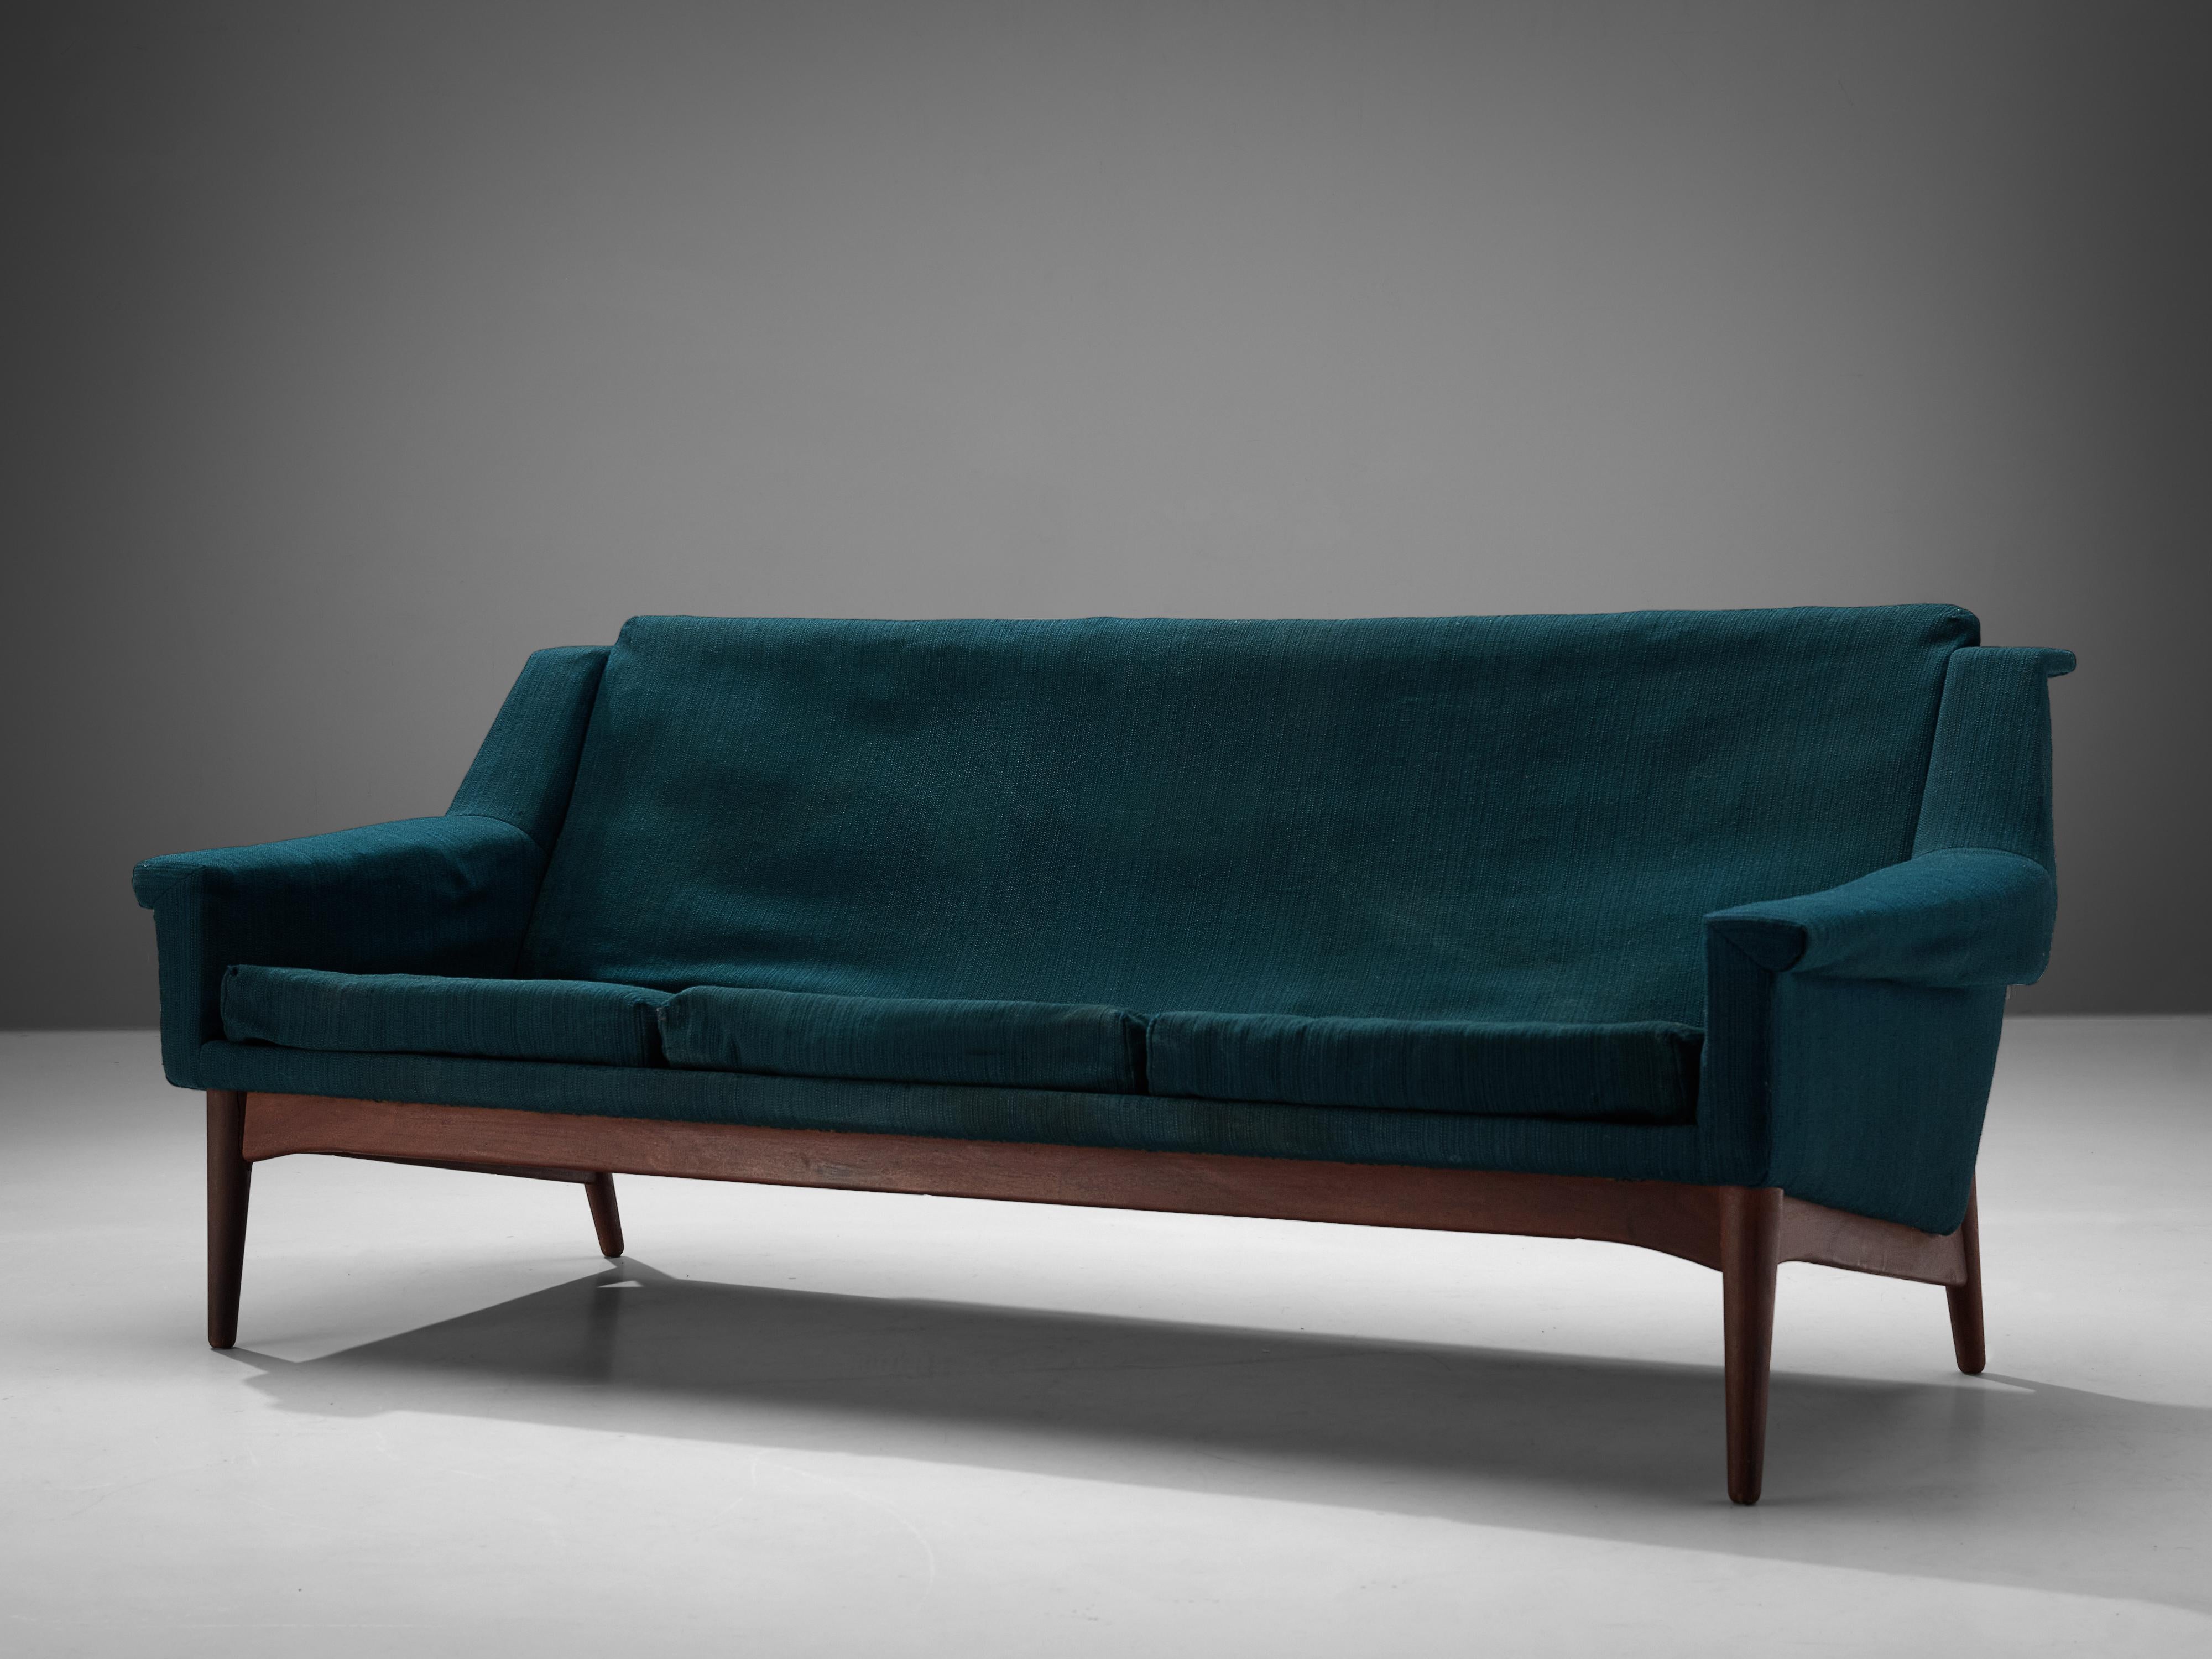 Sofa, teak, fabric, Denmark, 1950s

Scandinavian modern sofa with modest yet striking lines. The way the armrests bent outwards remind of the designs by Folke Ohlsson. Looking at the sofa from the side or back, the beautiful connections in this